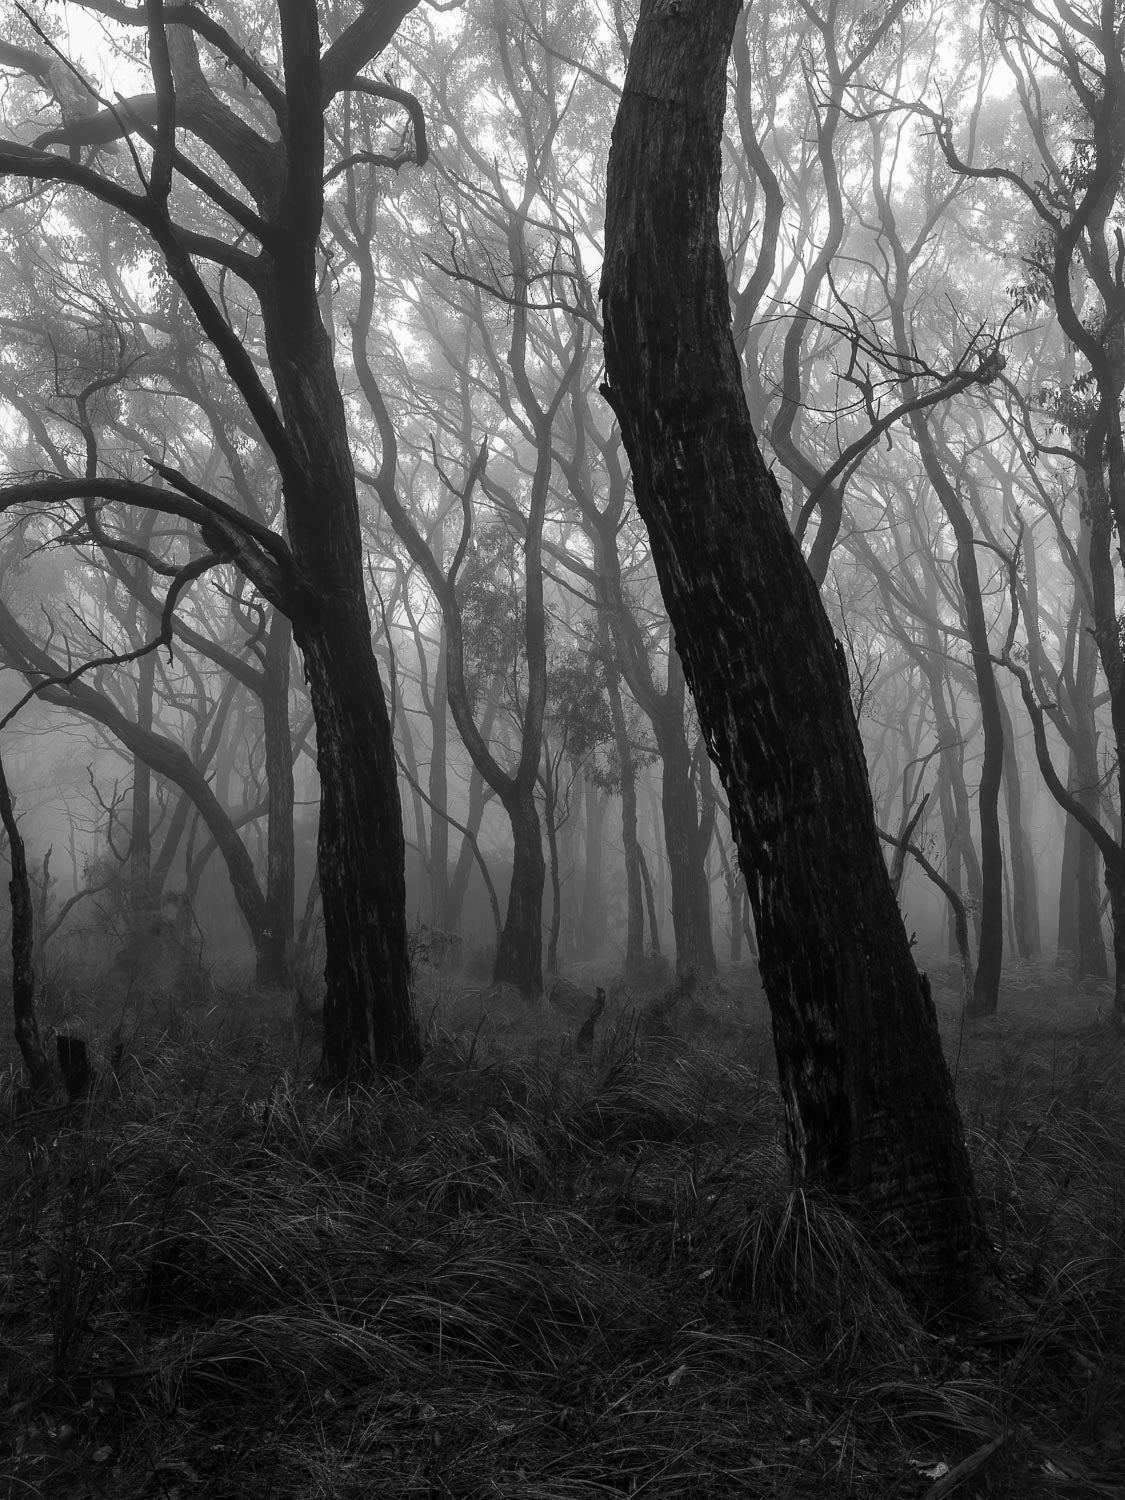 A dark black view of some large trees in the forest, no coming sunlight, Dancing Trees - Mornington Peninsula, VIC